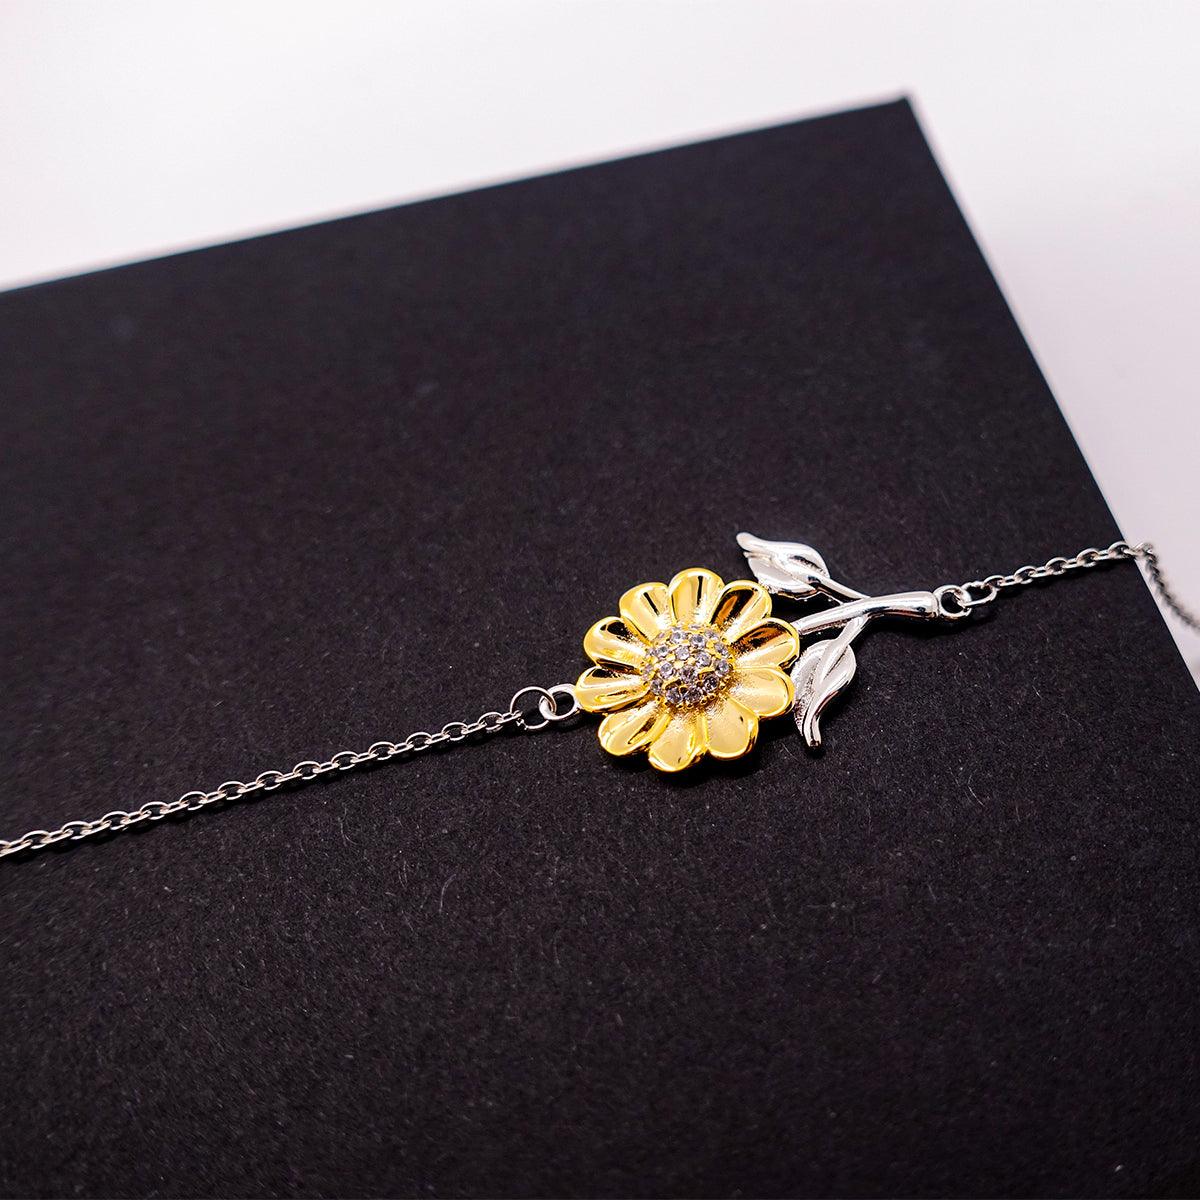 Remarkable Bookbinder Gifts, Your dedication and hard work, Inspirational Birthday Christmas Unique Sunflower Bracelet For Bookbinder, Coworkers, Men, Women, Friends - Mallard Moon Gift Shop